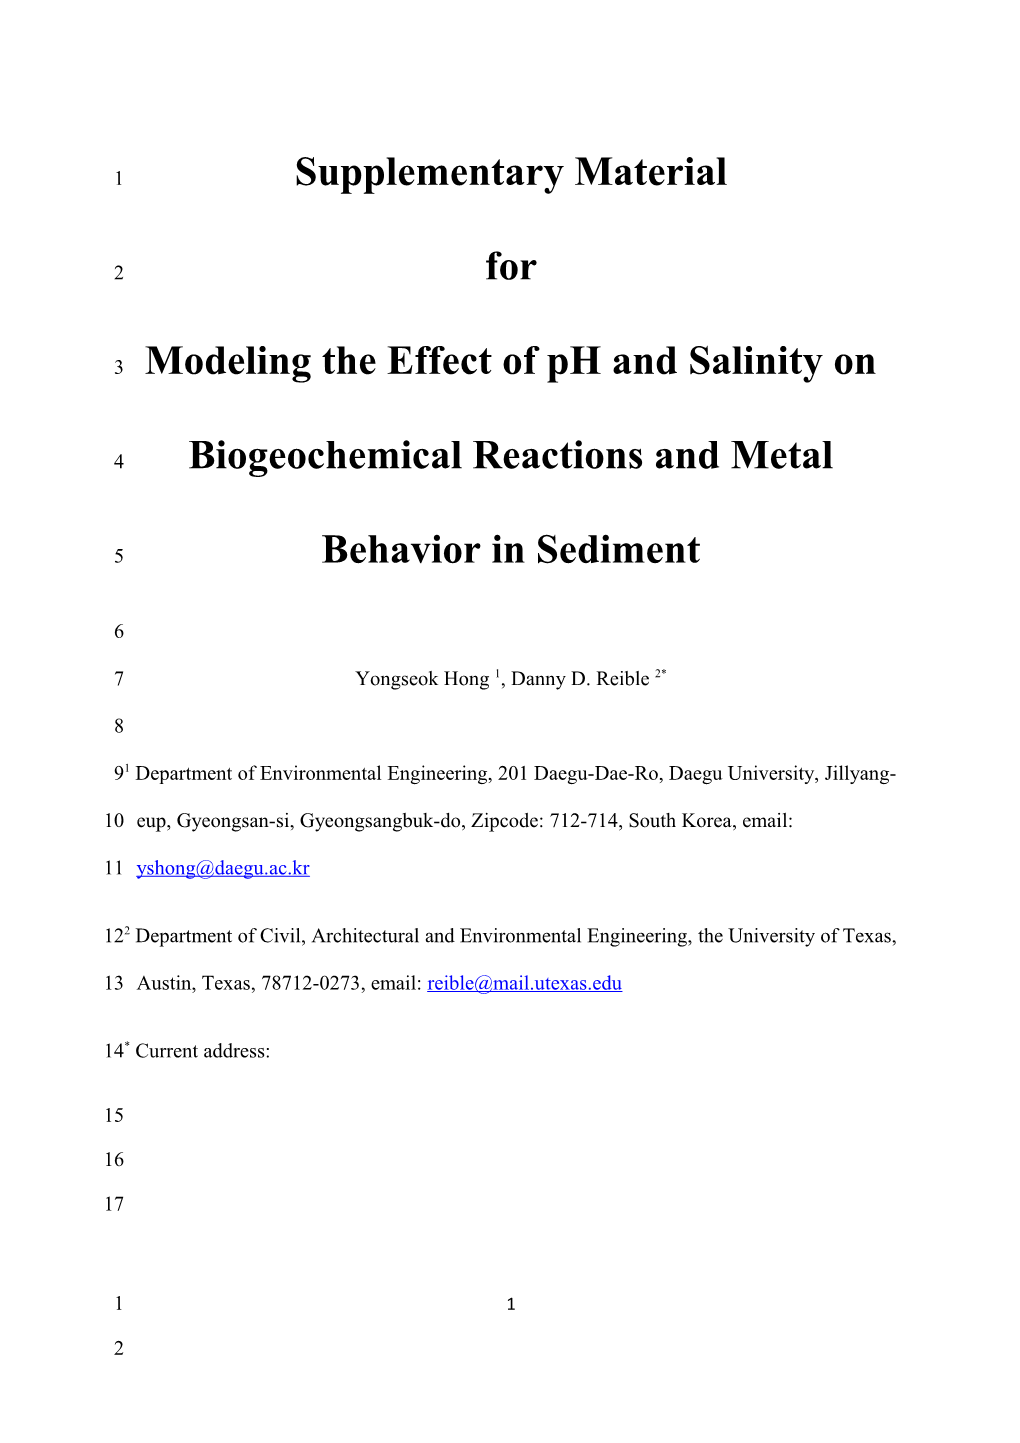 Modeling the Effect of Ph and Salinity on Biogeochemical Reactions and Metal Behavior